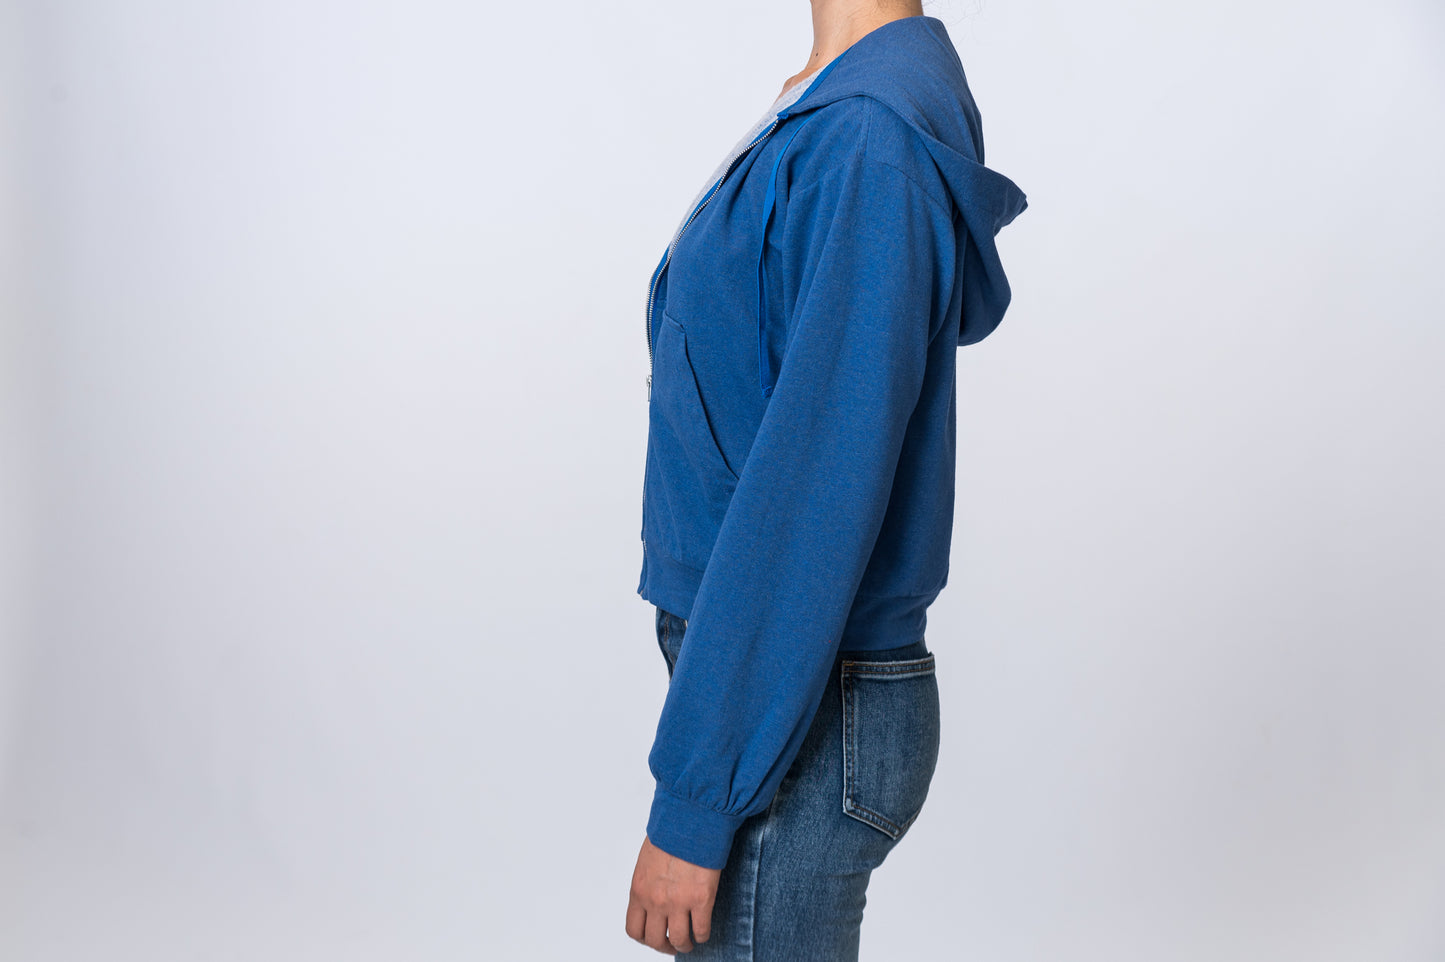 Woman wearing a blue zip up hoodie with jeans. Side of clothing is being shown